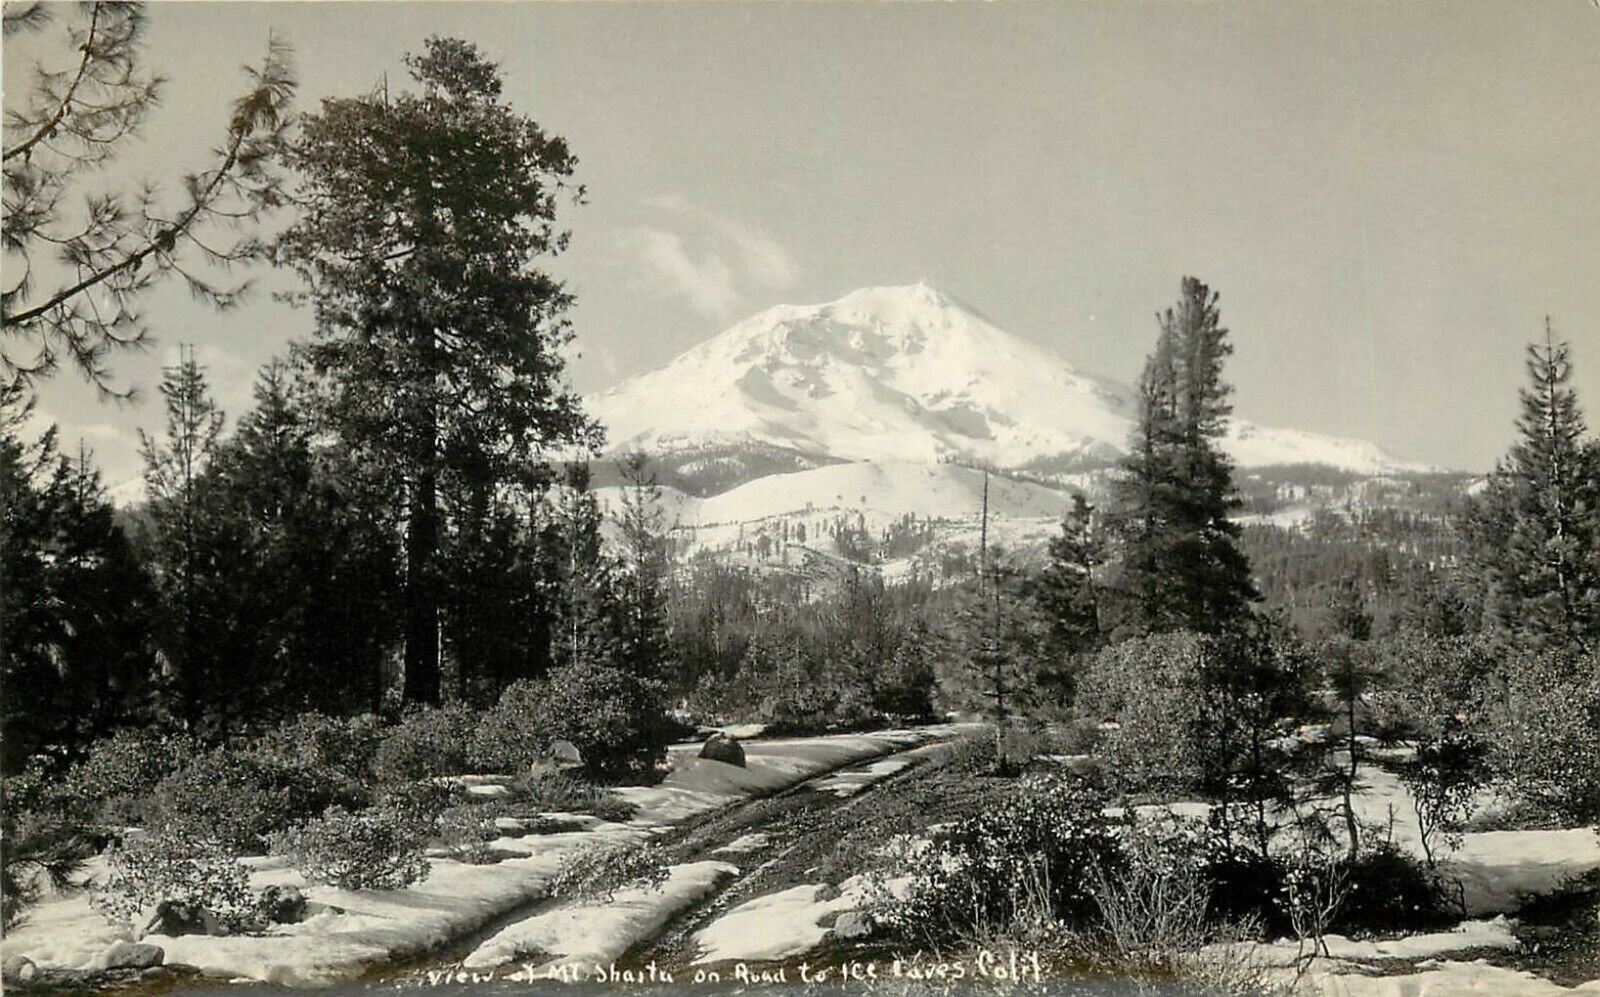 1930s RPPC View of Mt. Shasta on Unpaved Road to Ice Caves, Siskiyou County